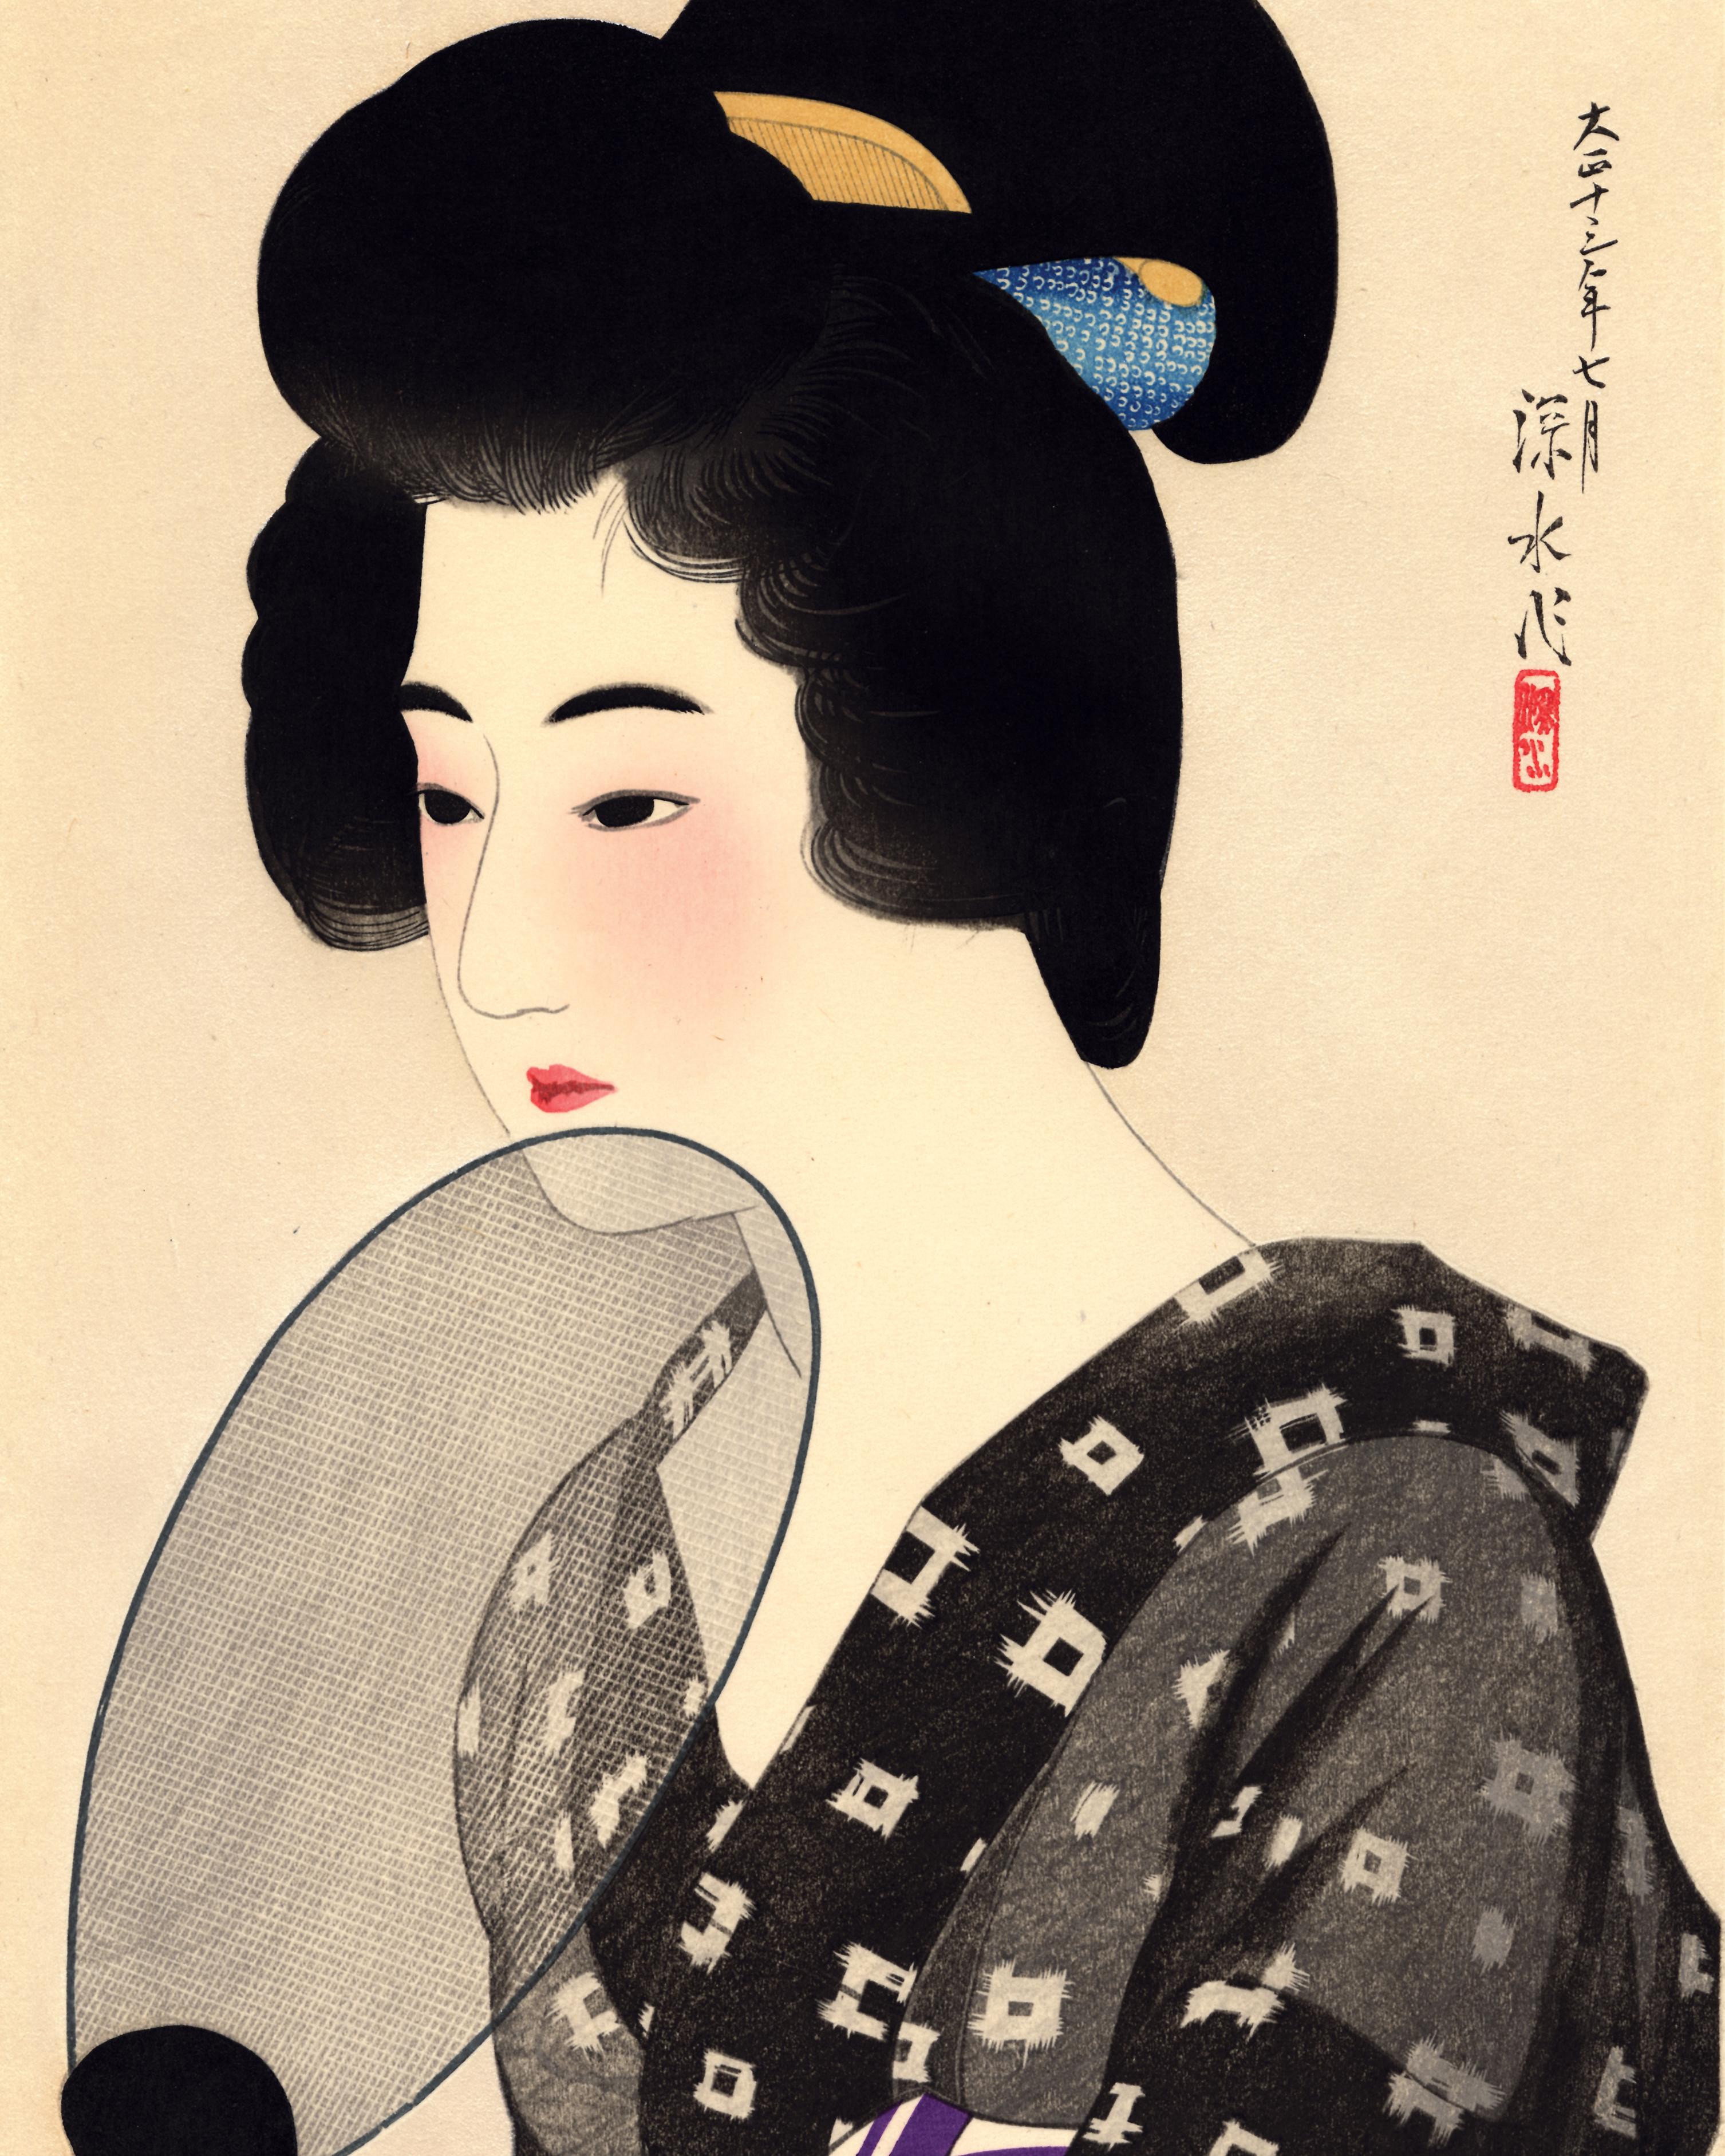 “Woman in a Chignon.” A beauty in a summer kimono holds a translucent net fan and looks thoughtfully to the left. Also known by the title “Woman With Fan”, the pure mica background highlights her beauty. This Taisho-era work contains the Watanabe